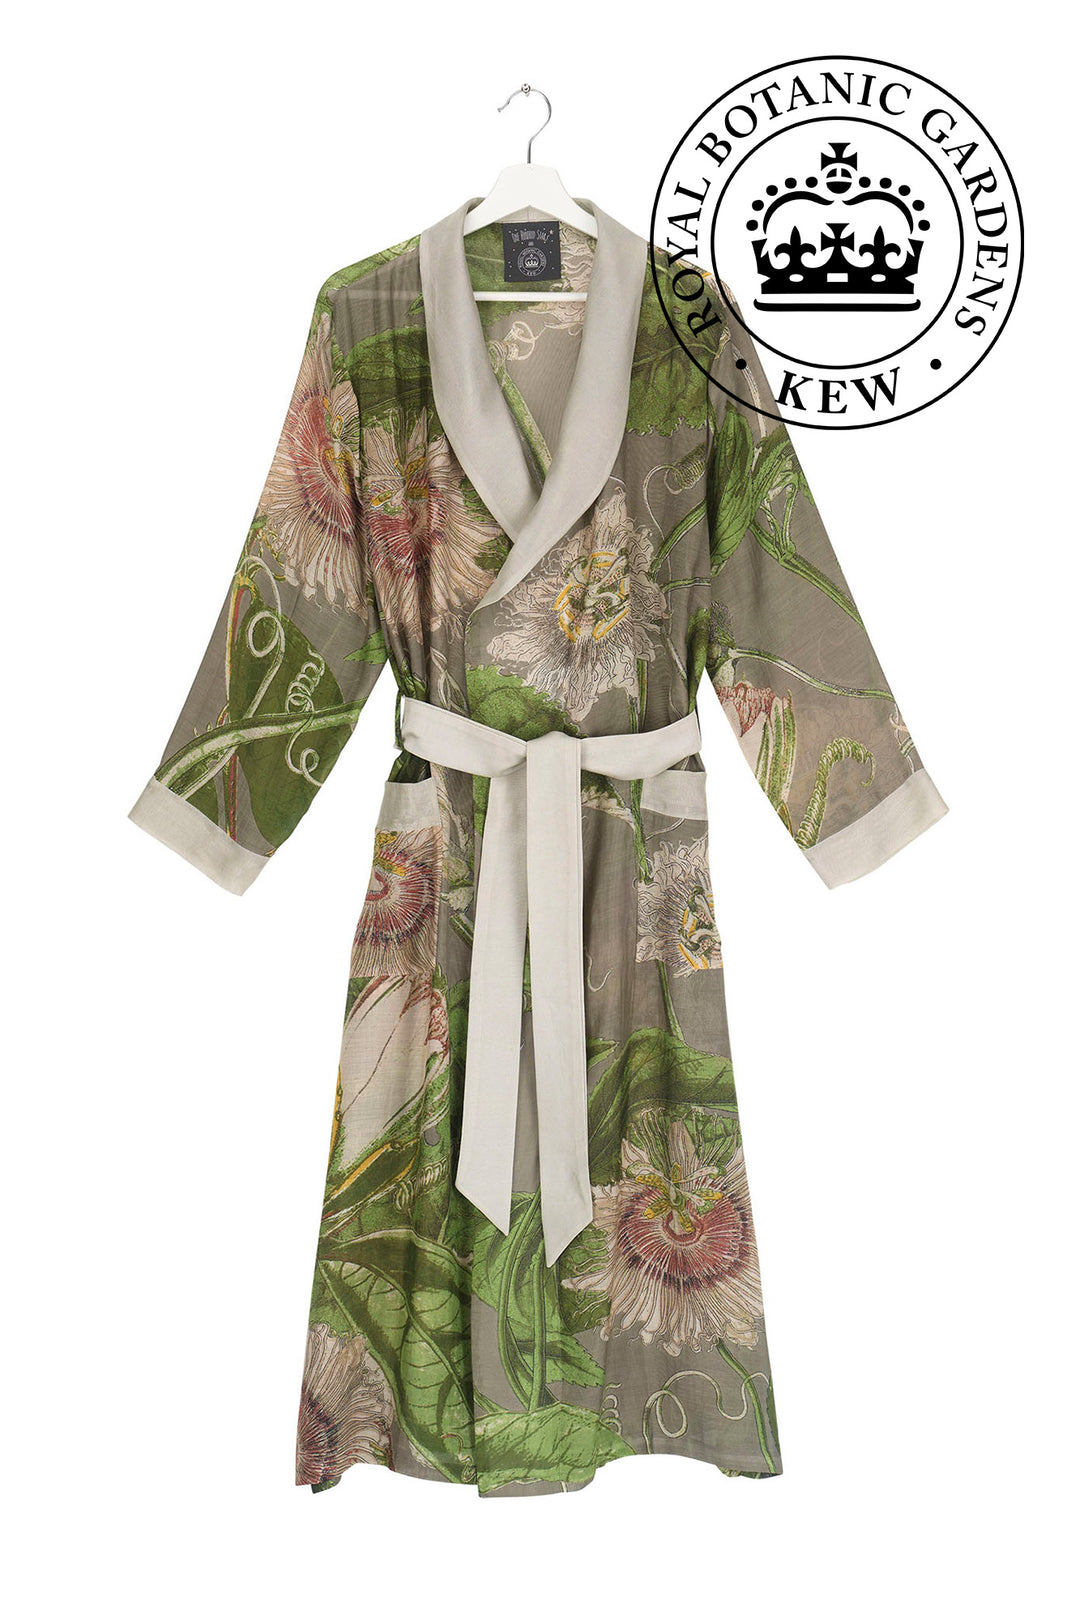 KEW Passion Flower Stone Gown-  This gown is perfect as a luxurious house coat or for layering as a chic accessory to your favourite outfit.